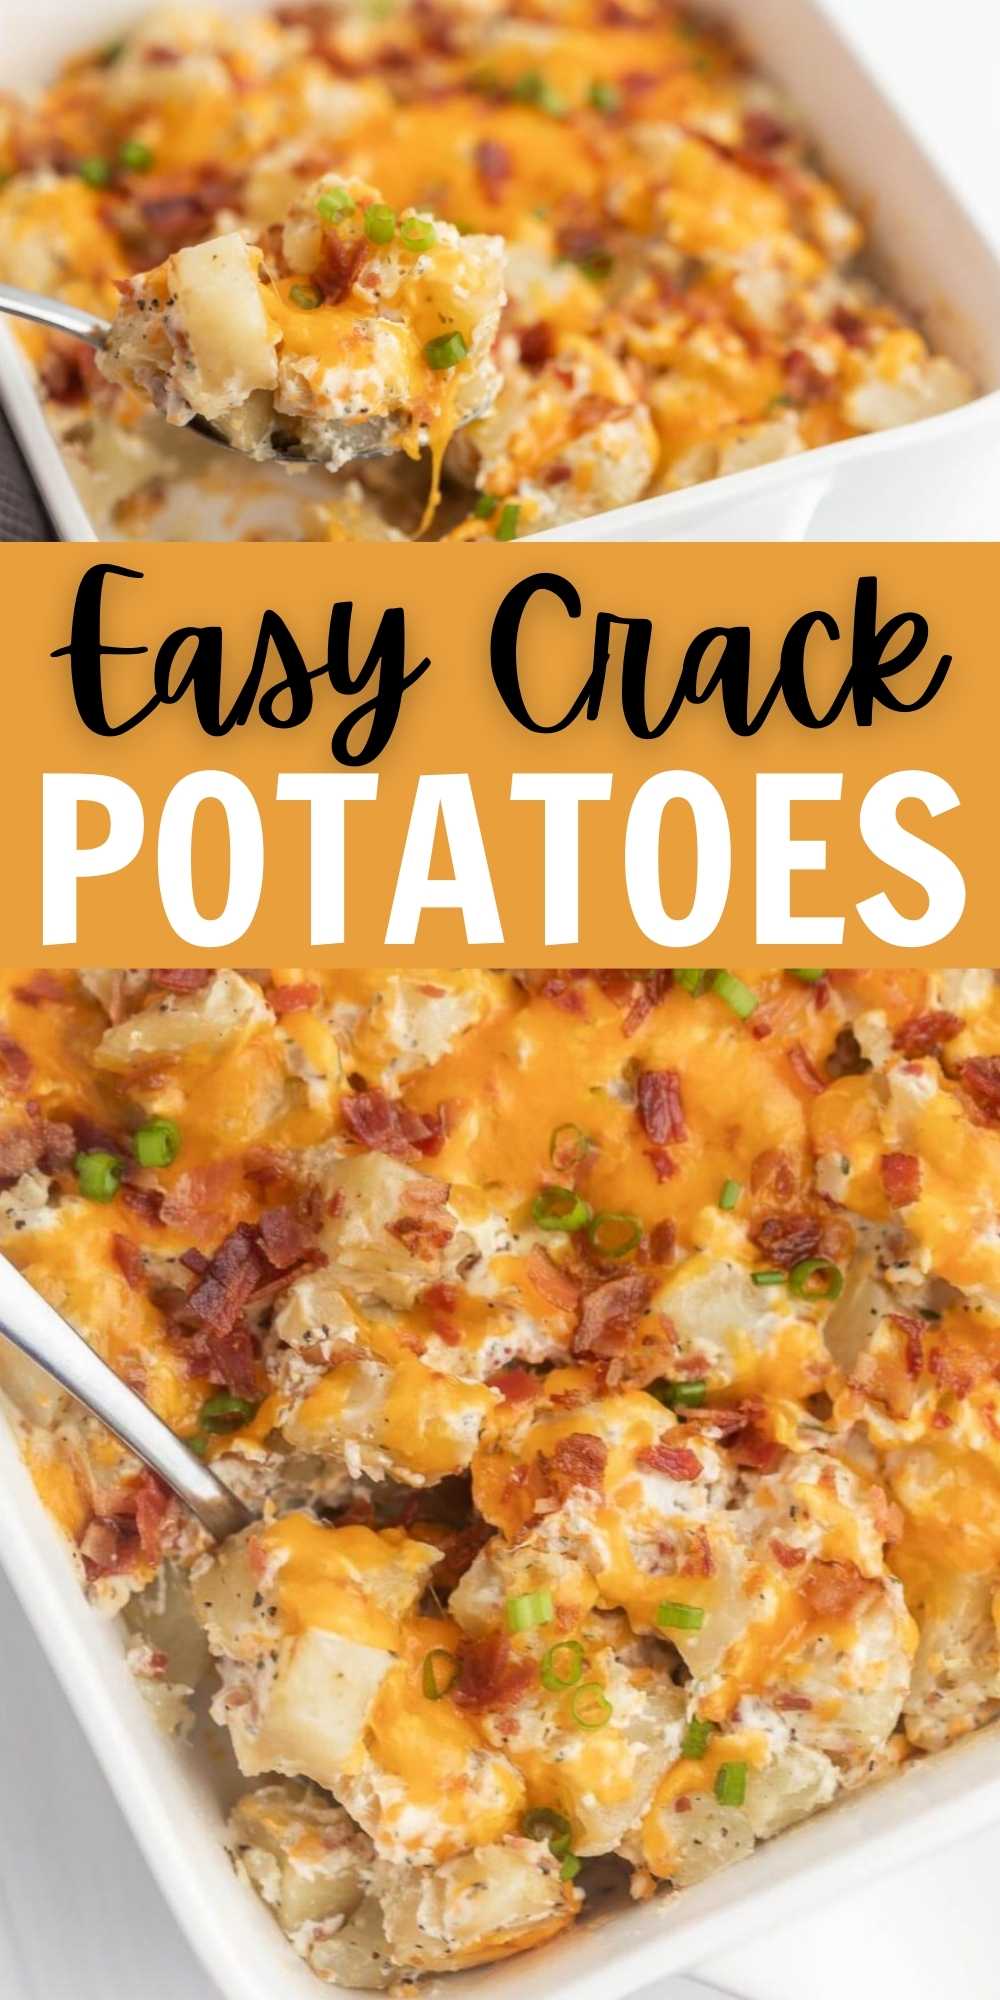 Crack potatoes is the perfect side dish with the best blend of ingredients. The potatoes are loaded with Ranch, cheese, bacon and more. These loaded crack potatoes are packed full of flavor and will be a crowd pleaser at your next dinner! #eatingonadime #sidedishrecipes #sidedishes #potatorecipes 
